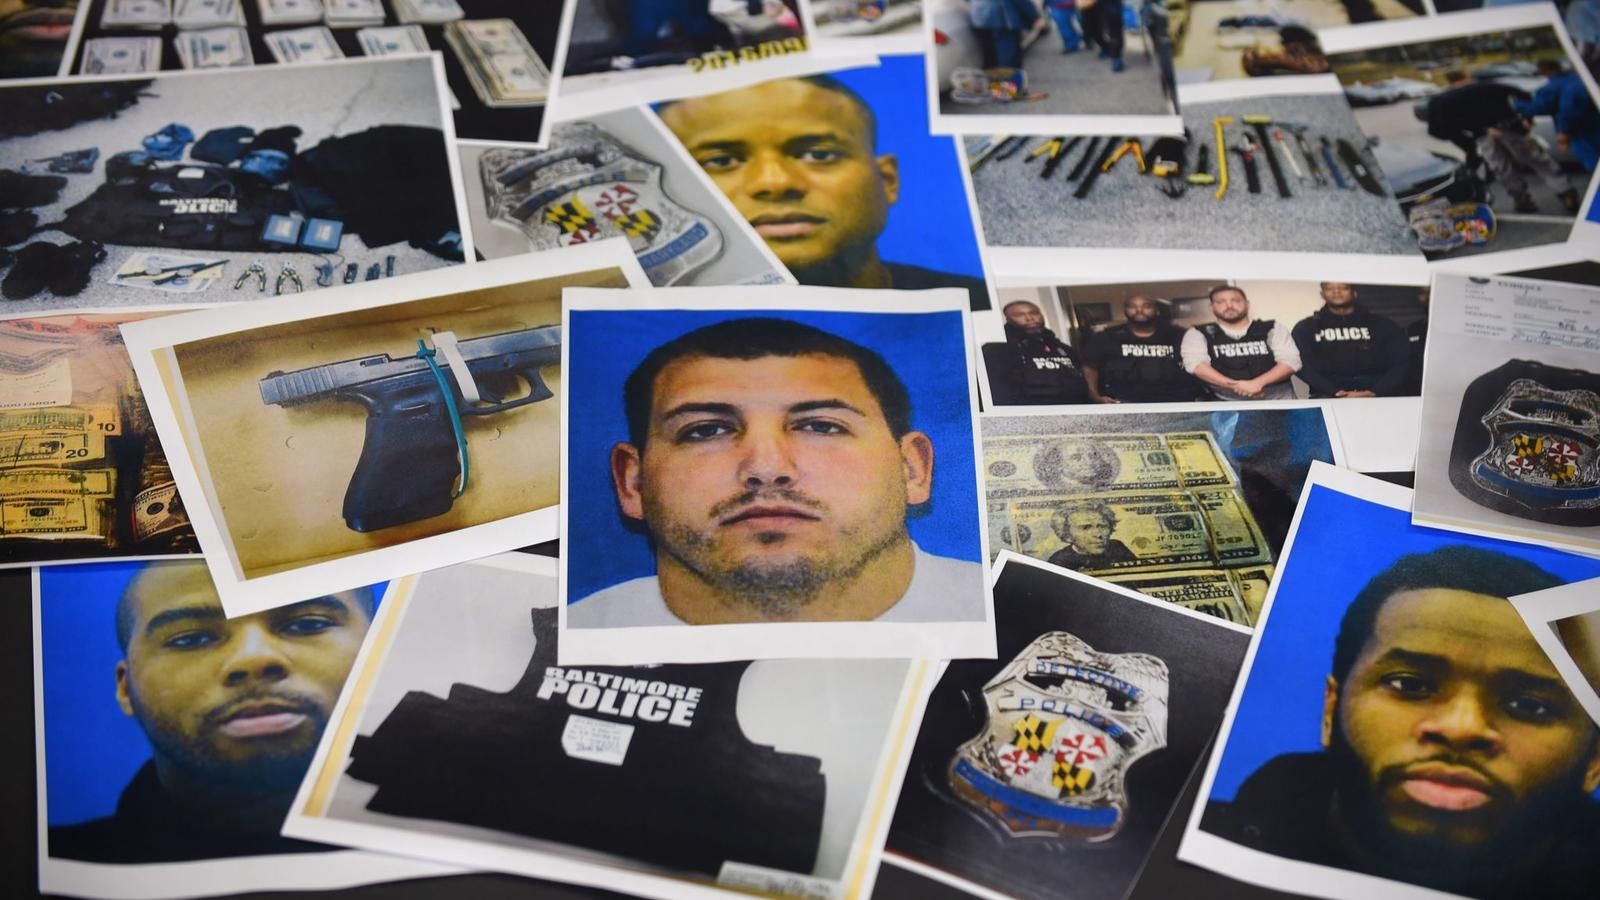 When seven officers from the Gun Trace Task Force were arrested in 2017, the sprawling case was shocking. Plainclothes officers targeted people, stole hundreds of thousands of dollars, lied about overtime and also conducted searches without warrants. Image by Kevin Richardson. United States, 2019.